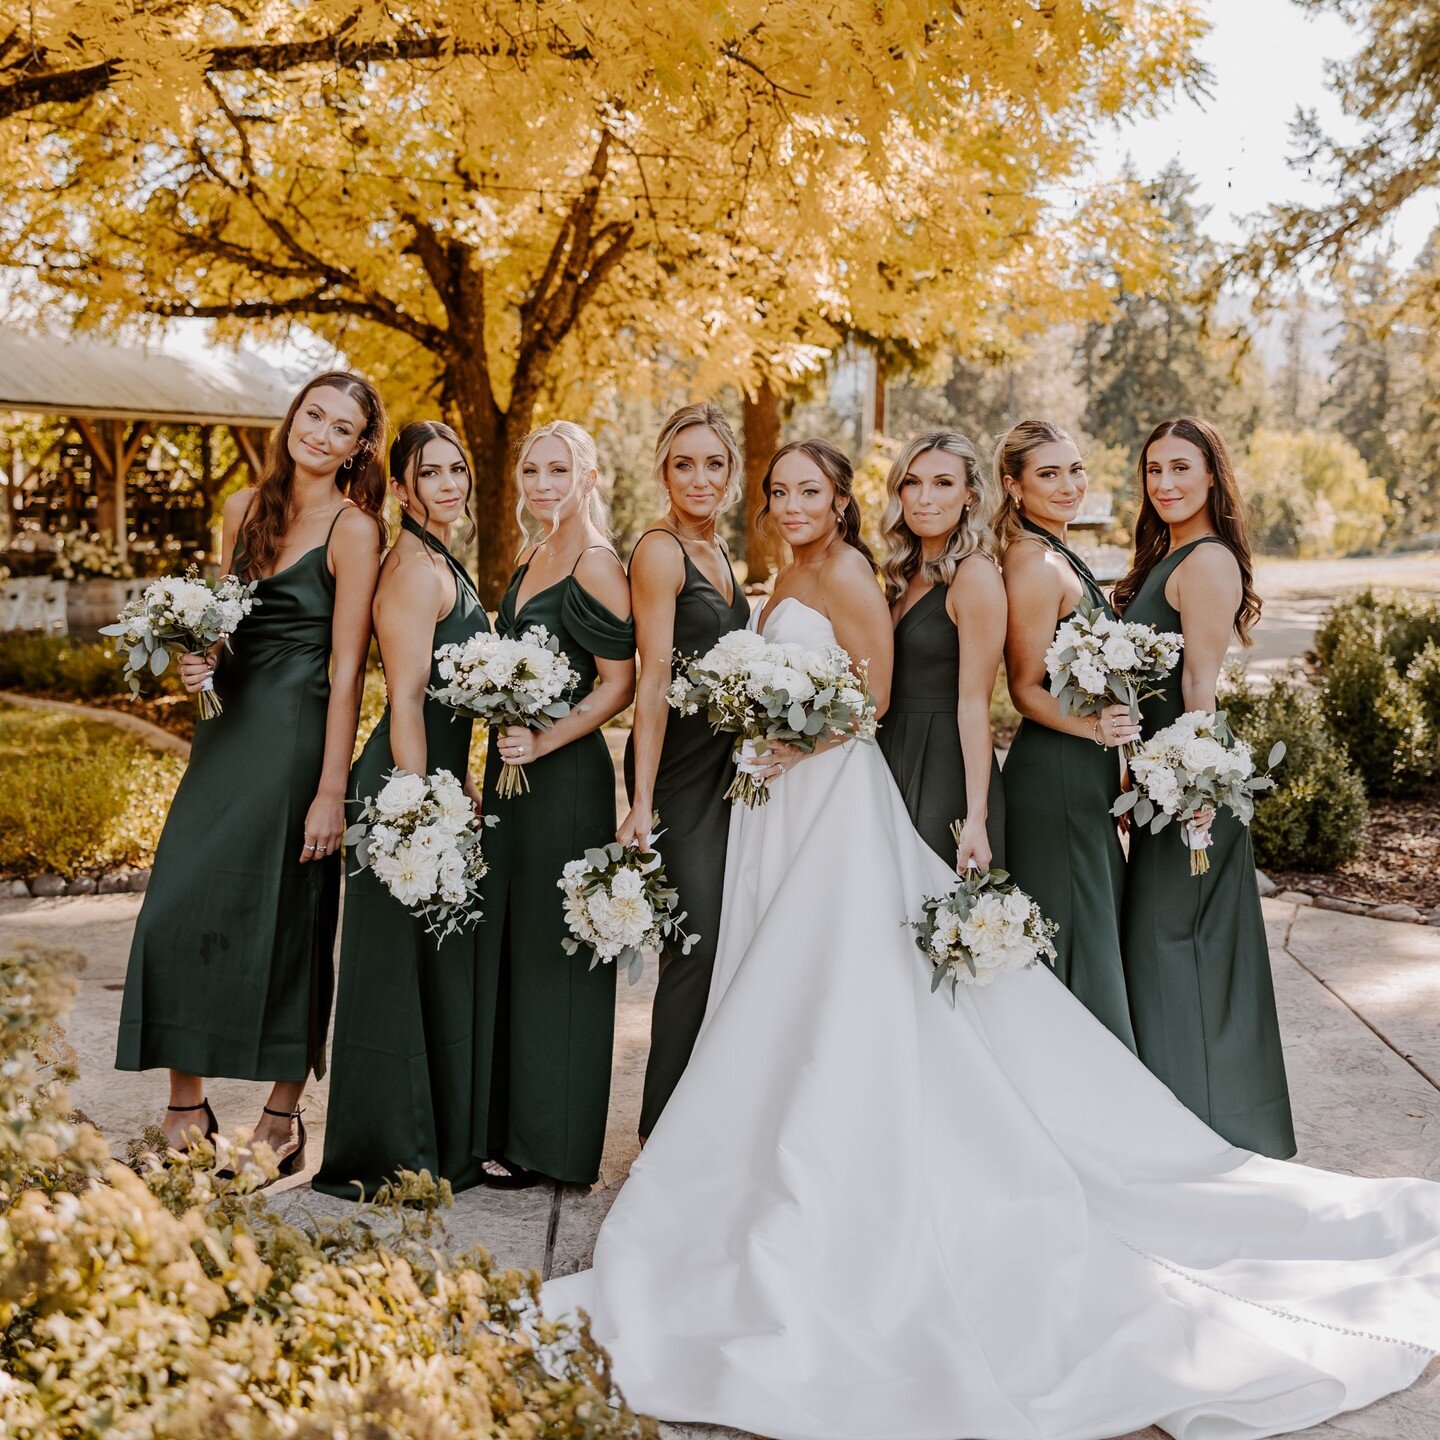 Statement makers for an autumnal celebration: warm hues, falling leaves, a cozy fire, and maybe a hot-as-July wedding party...&hellip; @rachellynn.mn